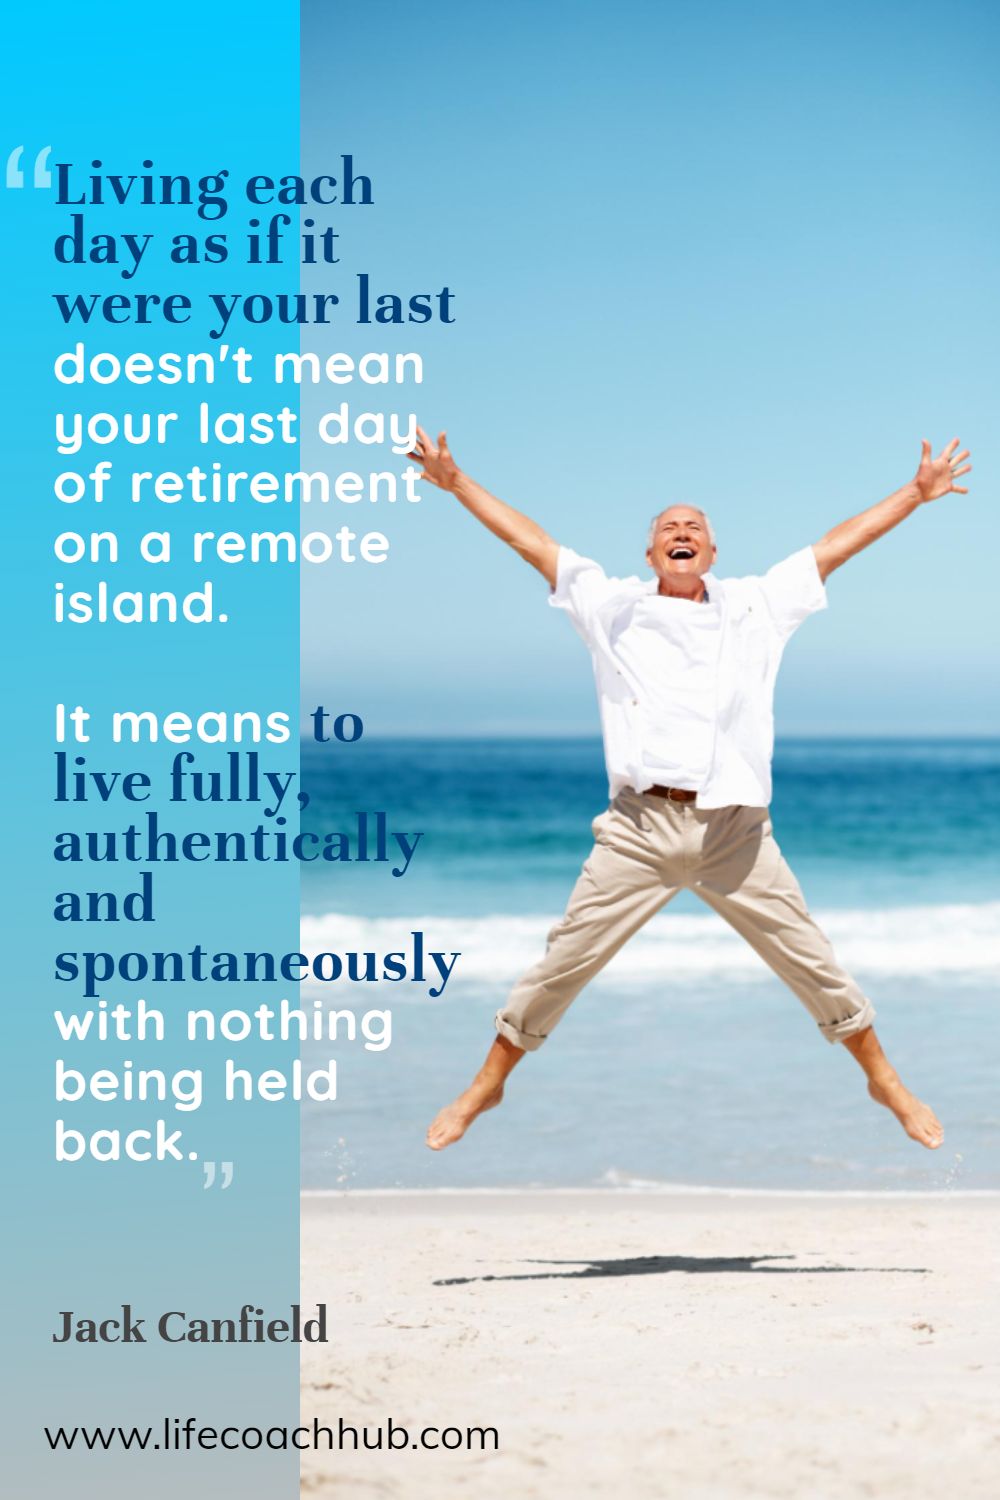 Living each day as if it were your last doesn't mean your last day of retirement on a remote island. It means to live fully, authentically and spontaneously with nothing being held back. Jack Canfield Coaching Quote